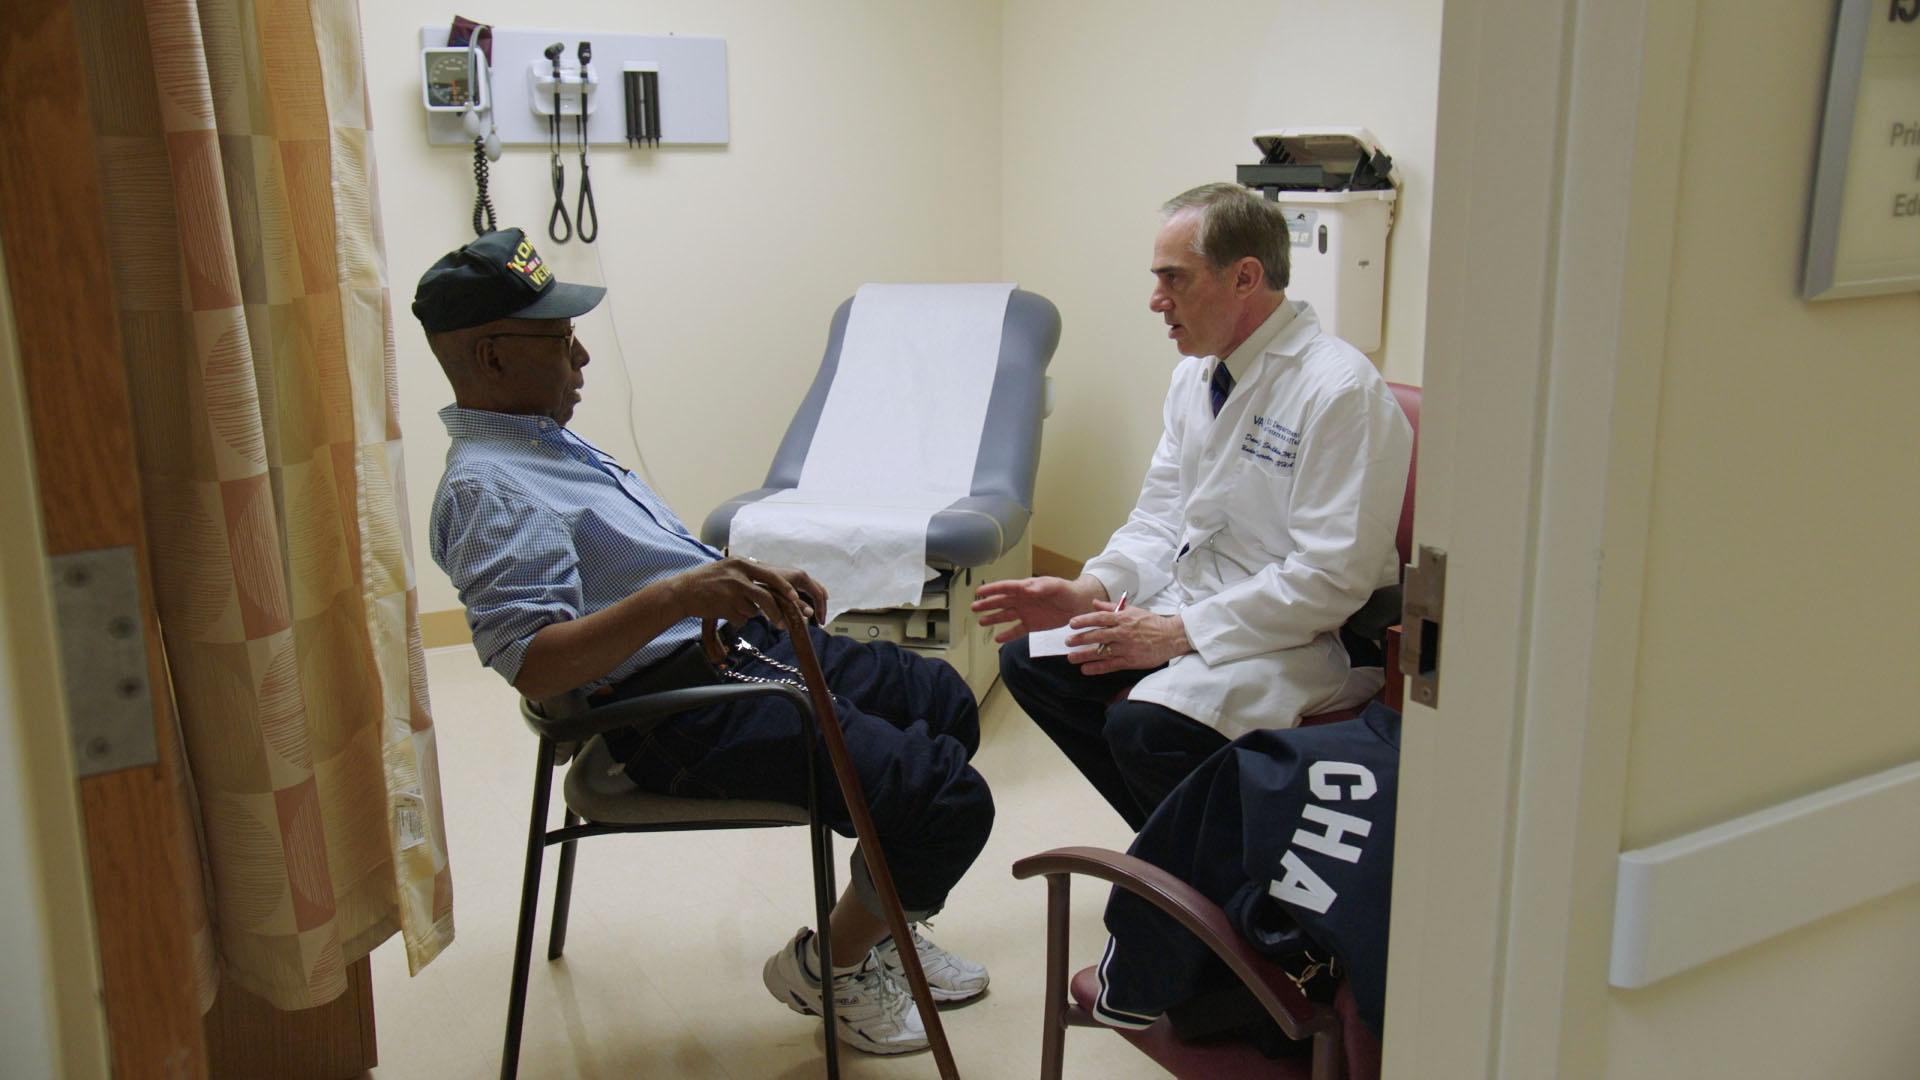 Dr. David Shulkin, Secretary of the U.S. Department of Veterans Affairs, speaks with a patient.